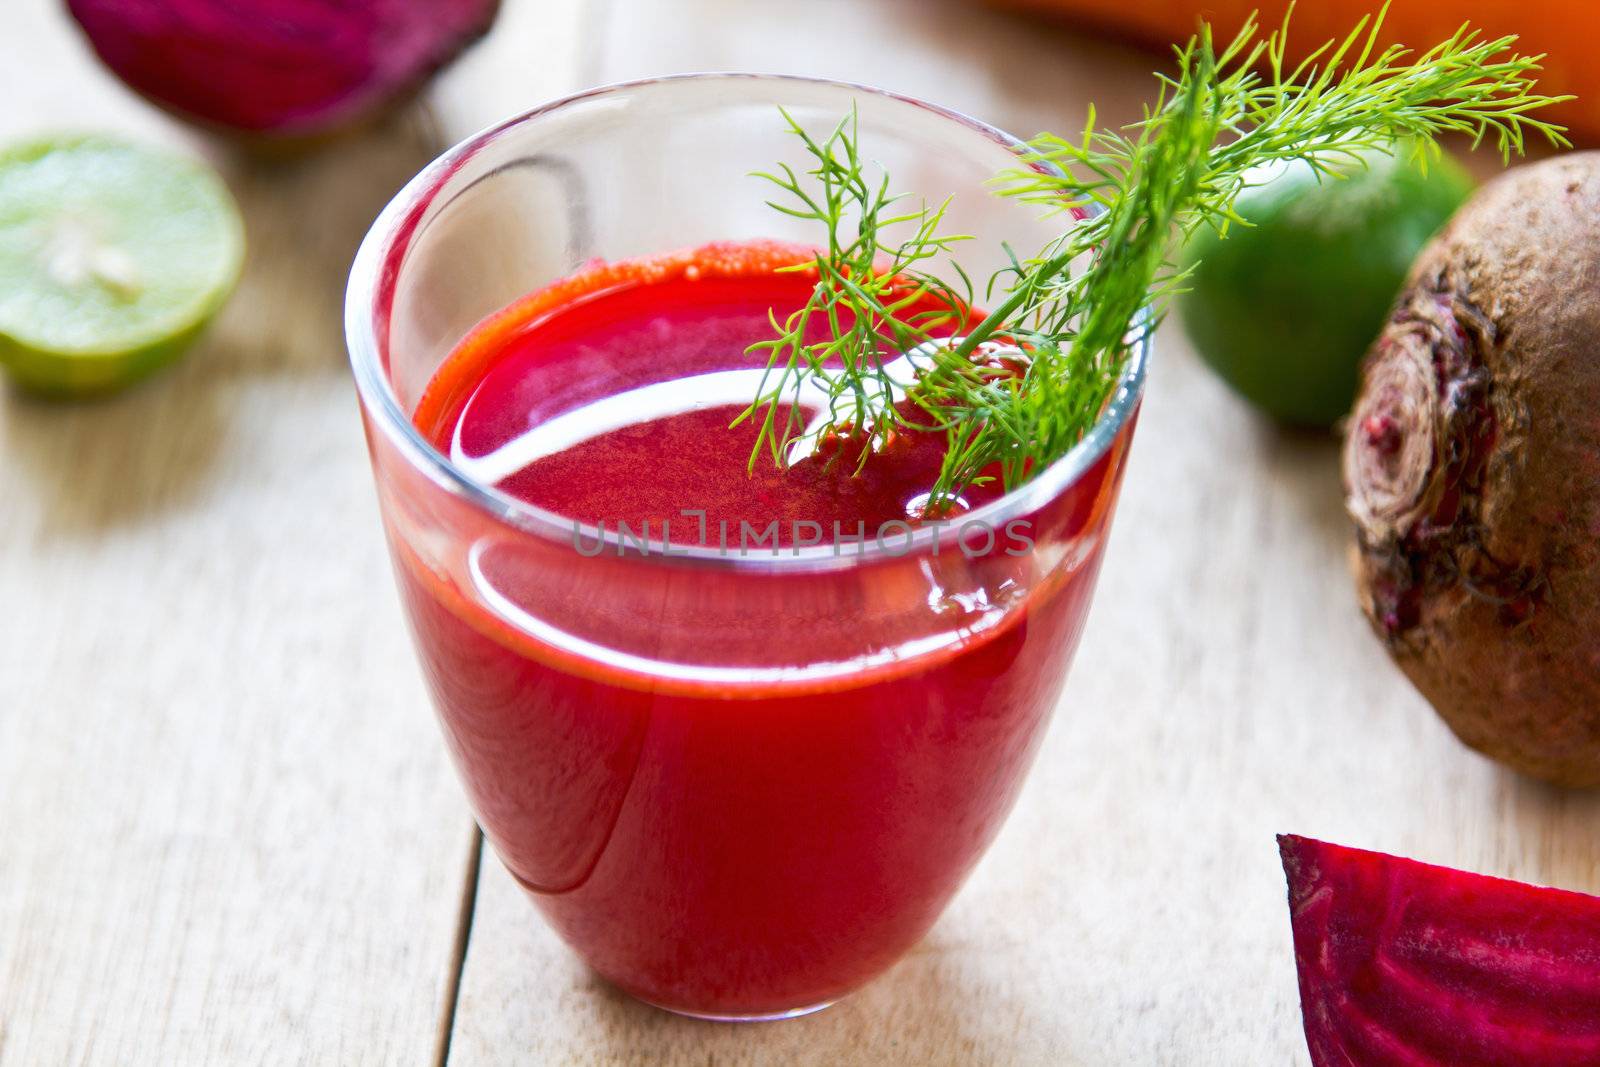 Beetroot with Carrot and Lime juice by vanillaechoes